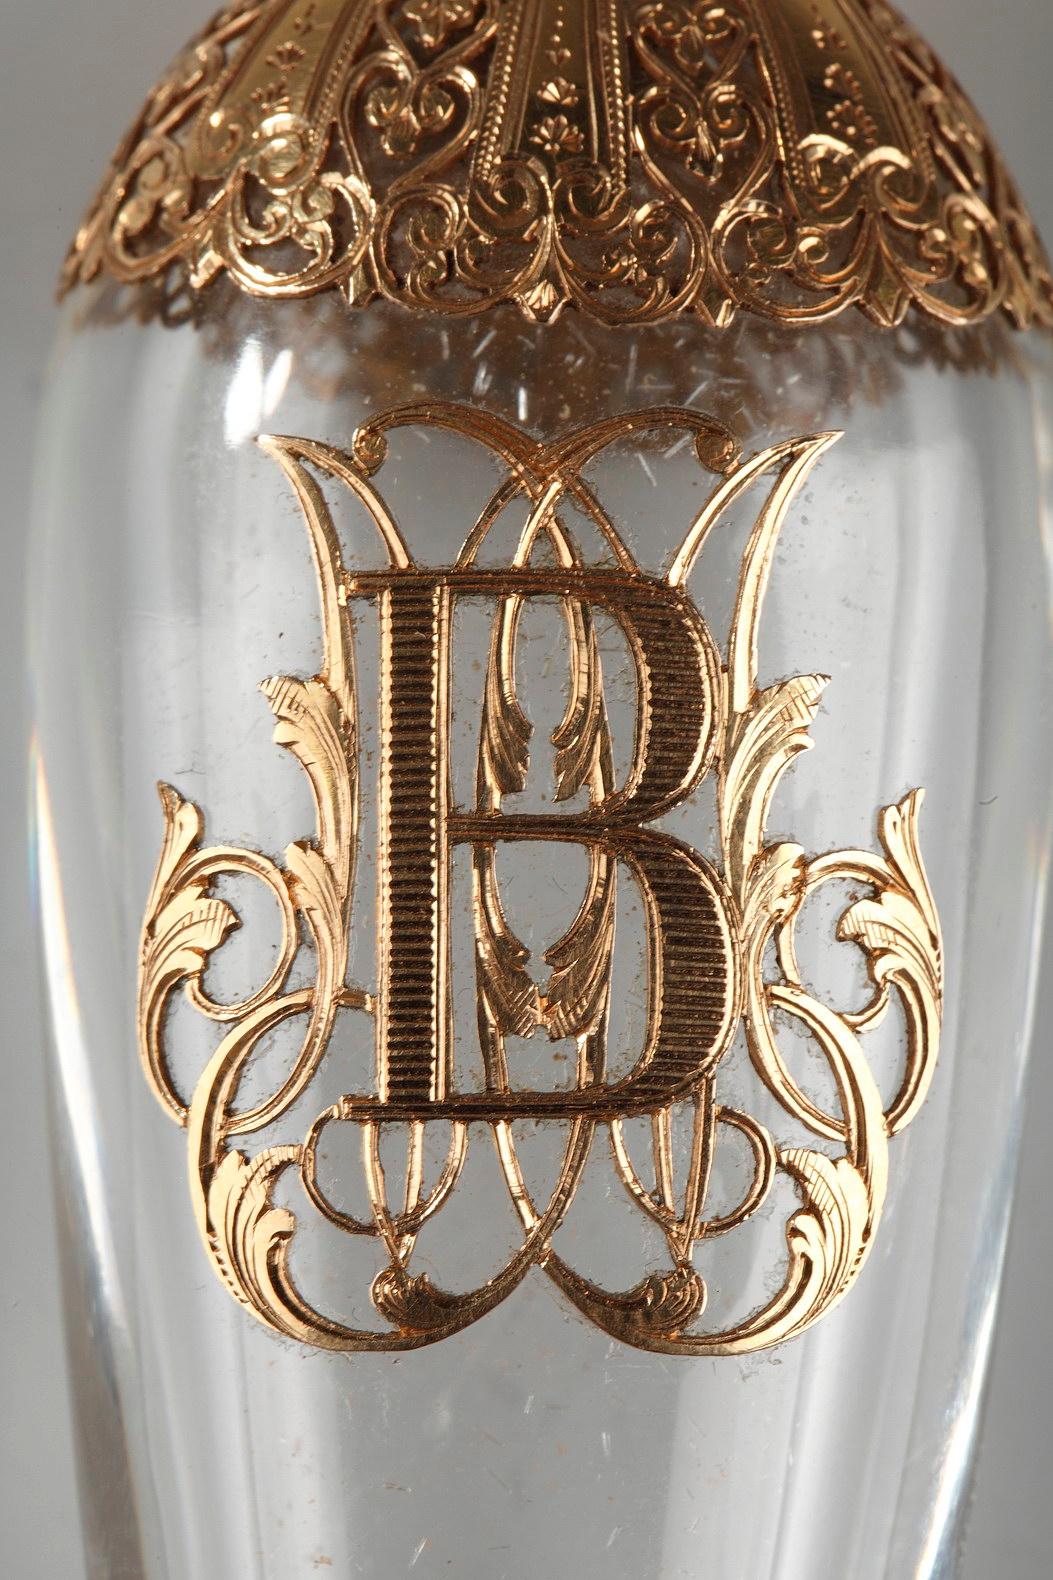 eardrop-shaped crystal flask in pierced gold mount, intricately sculpted with hearts, palmettes, and scrollwork. The mounting is set on the base and the neck, and a large letter B is highlighted on the paunch of the flask. The delicately sculpted,